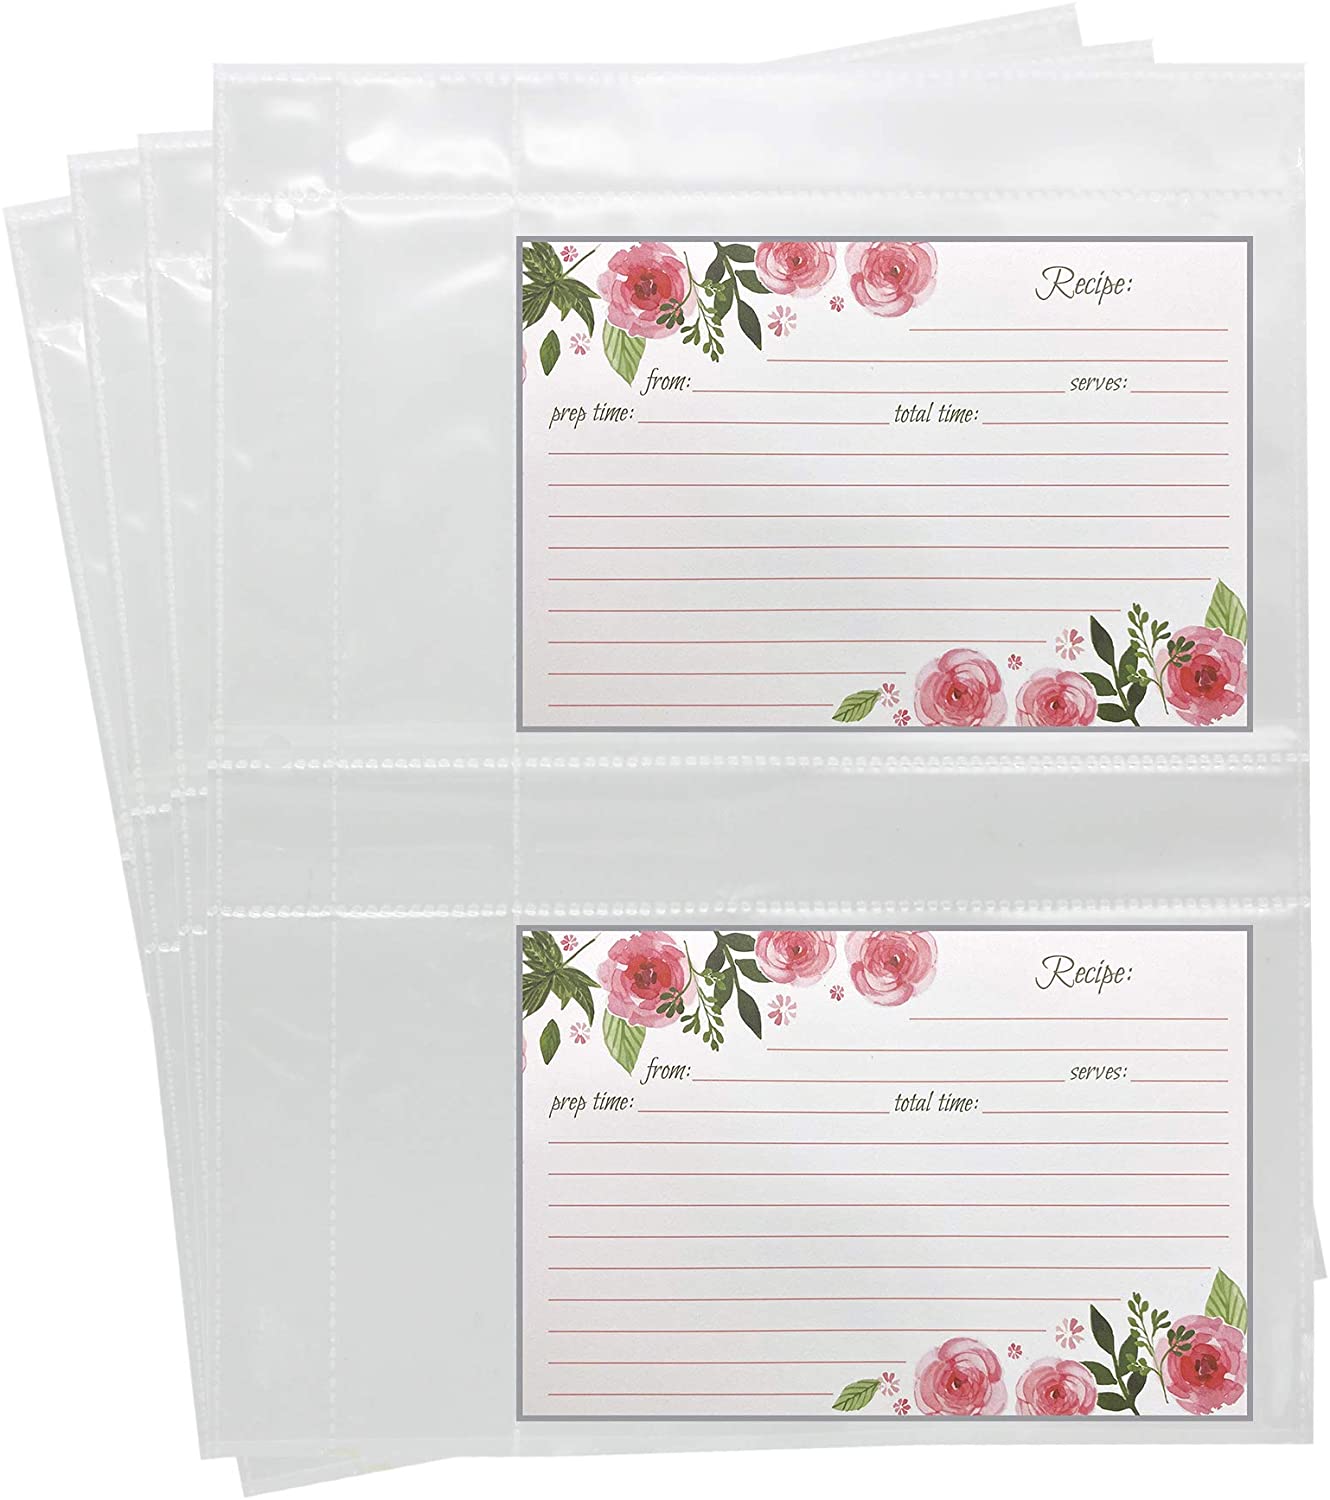 Products Recipe Card Protectors, For 3 Ring Binders, Page Sheet Protectors, Holds 4 x 6-inch pockets, 4 Cards Per Sheet, Clear - 20 Pack